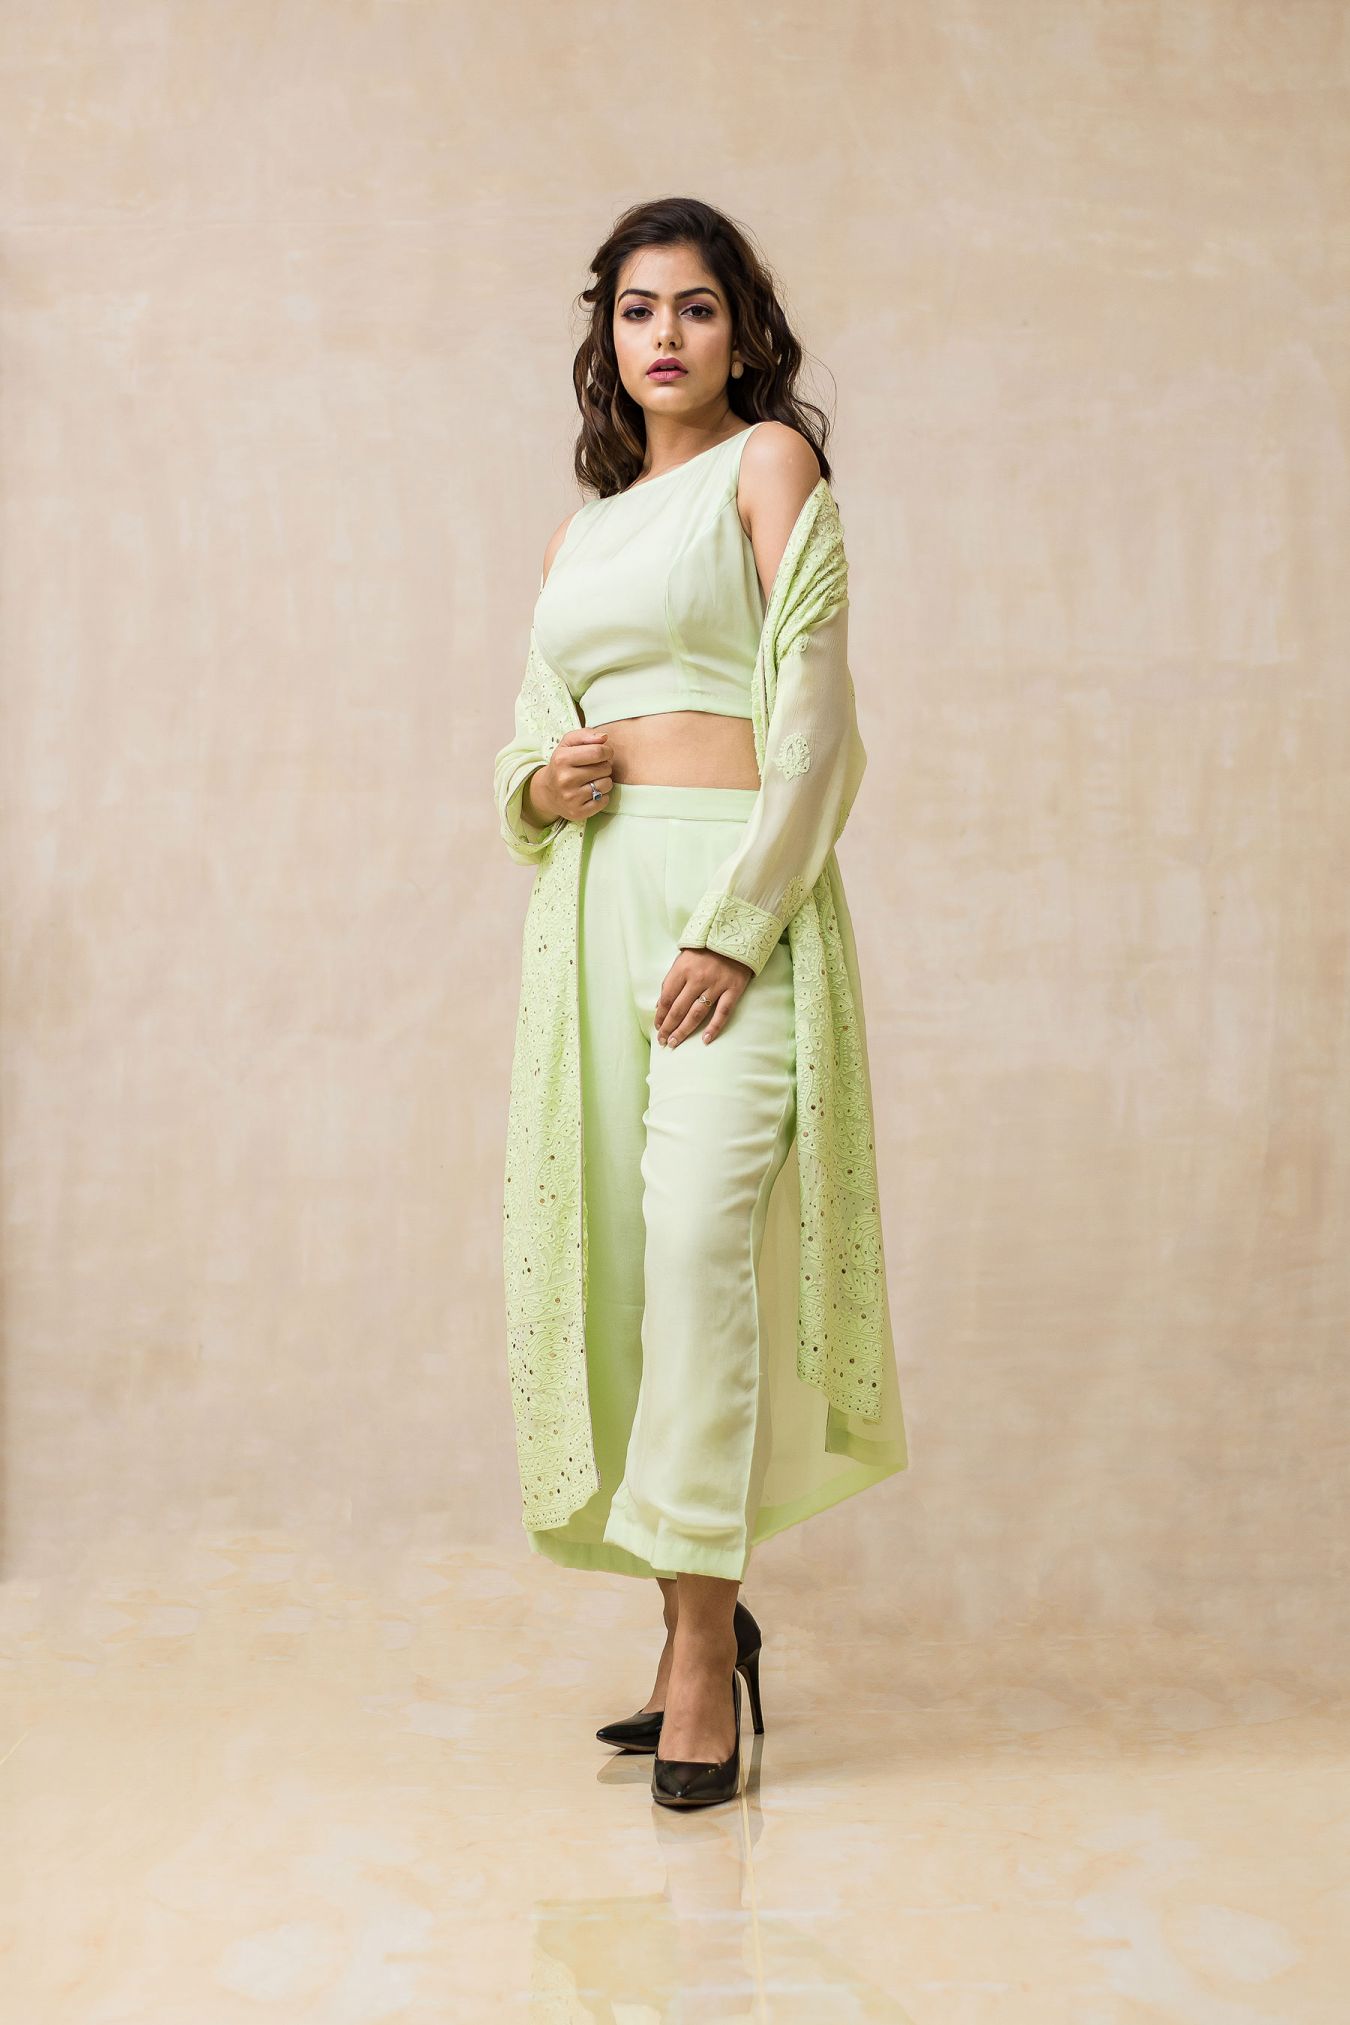 Schmick Handcrafted Chikankari Jacket Paired with Crop Top & Palazzo in Fresh Hue of Pista Green Color.